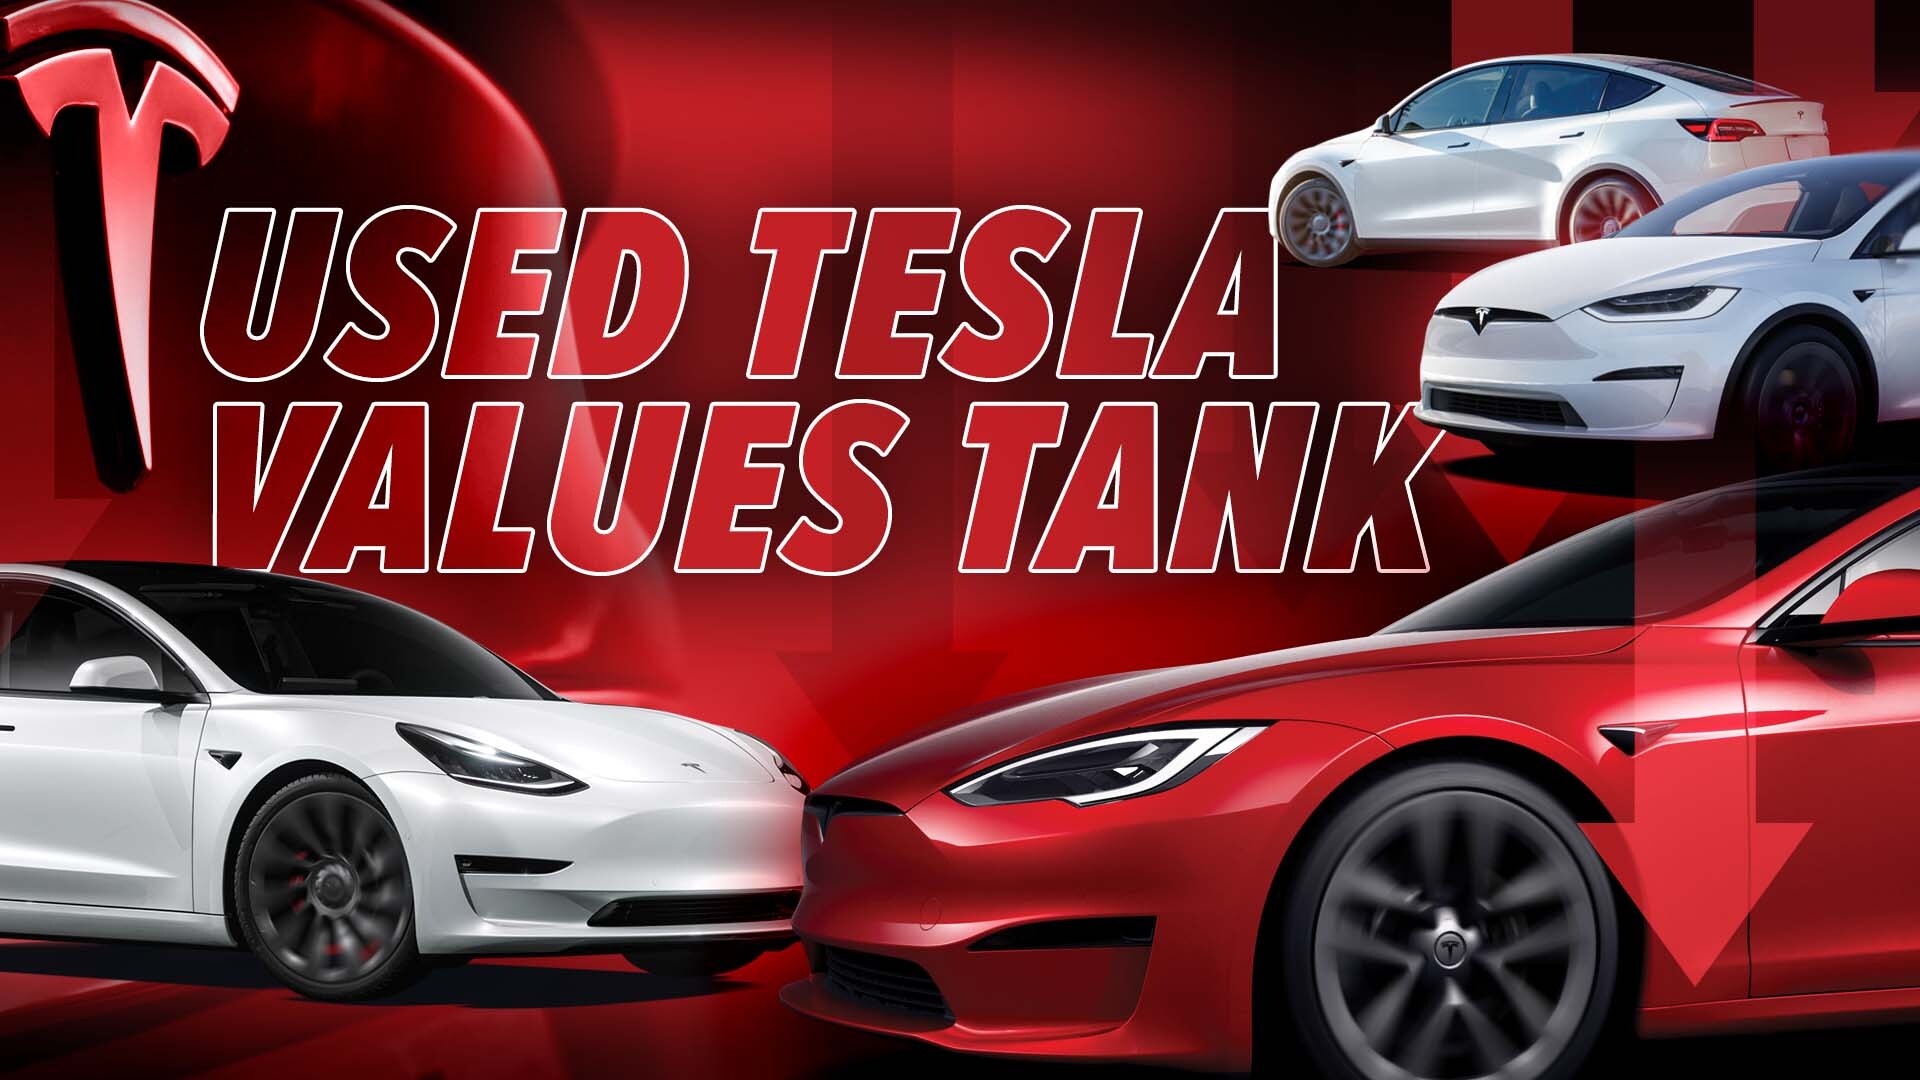 Tesla prices are in free fall as latest used car data shows huge drops